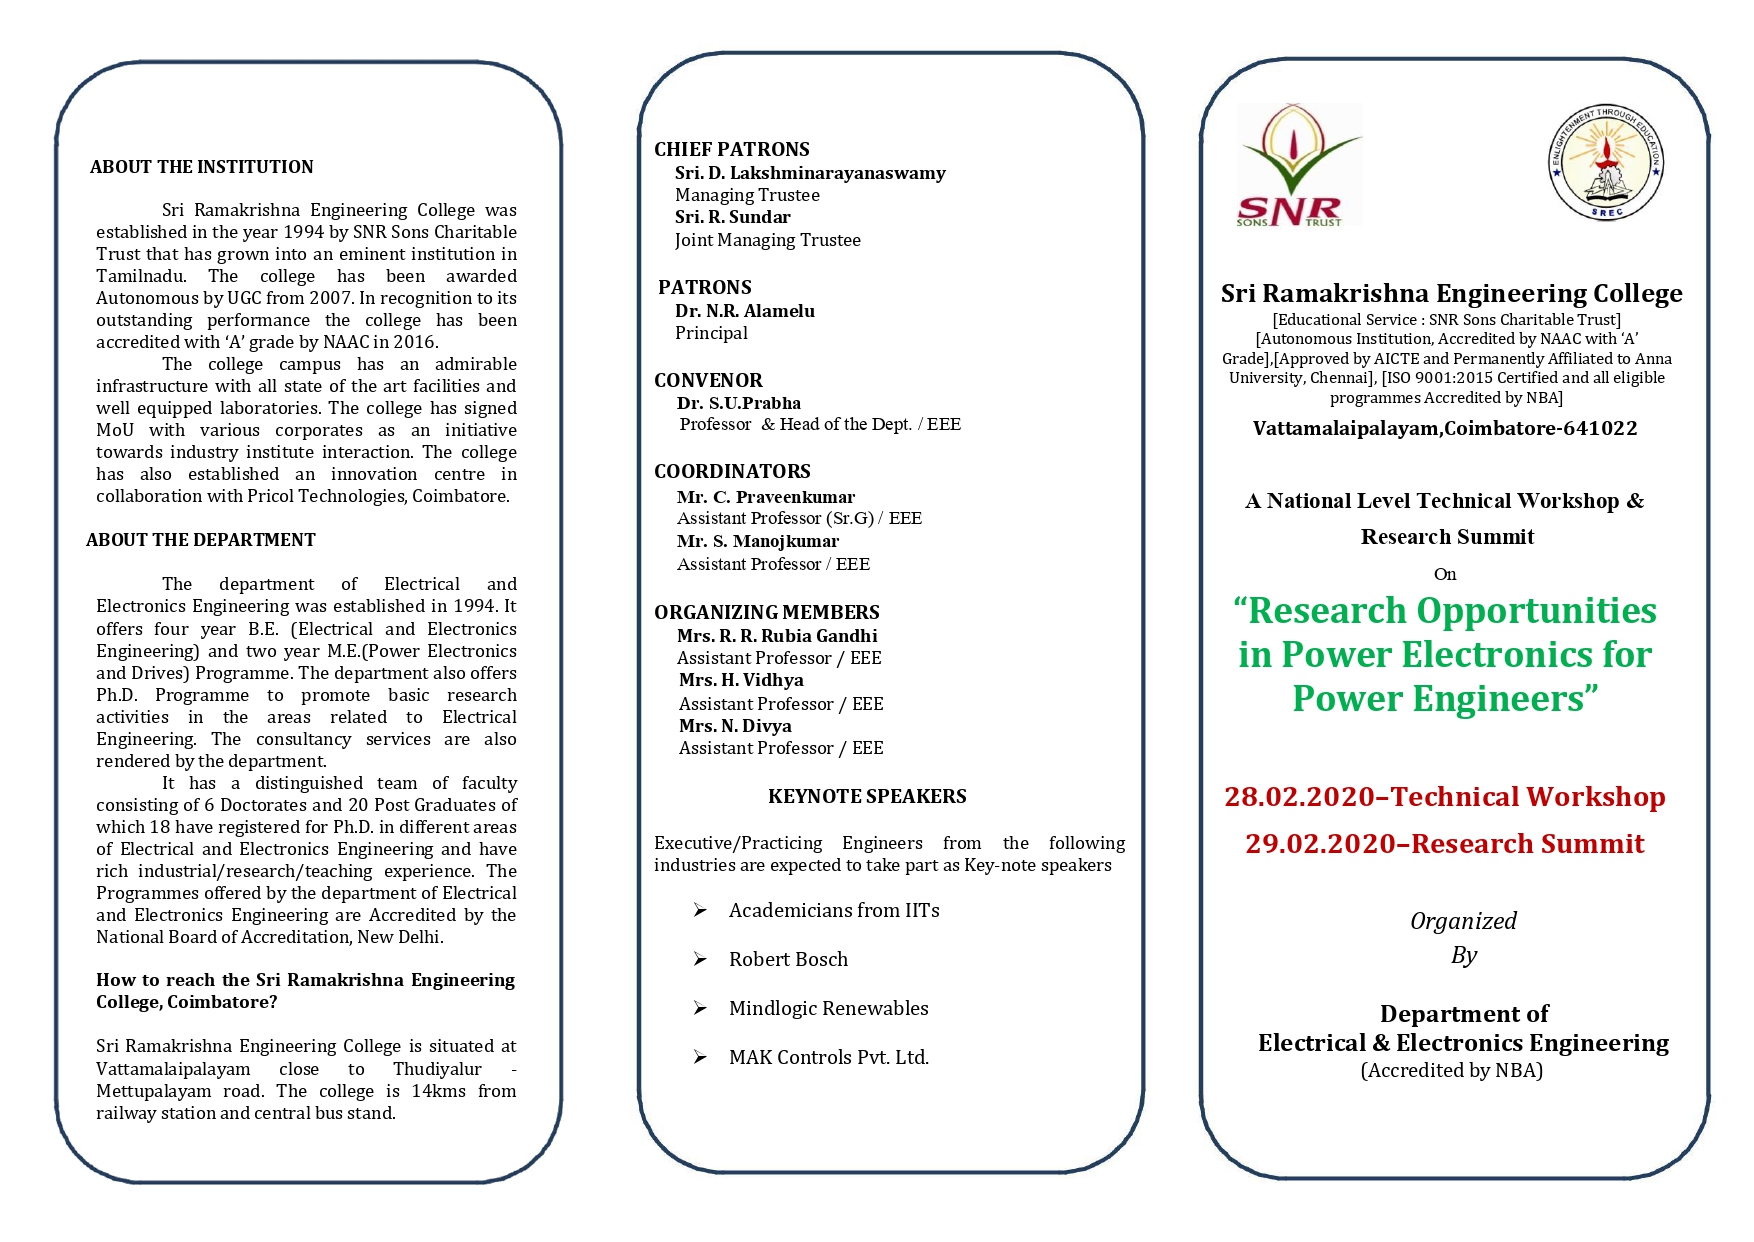 National Level Technical Workshop and Research Summit 2020